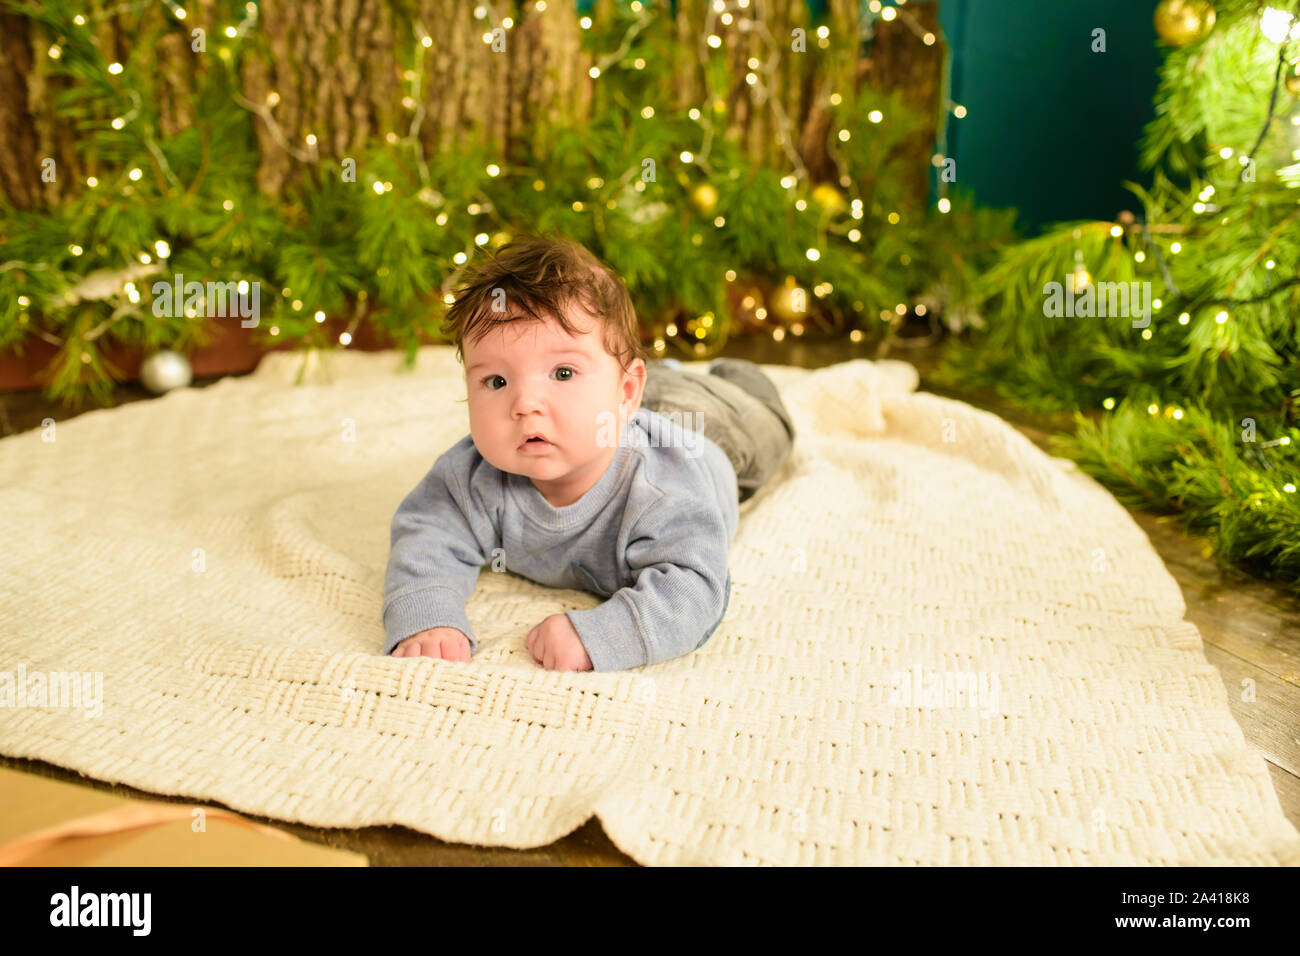 A child near the Christmas tree. Little boy celebrating christmas. baby's first christmas. Stock Photo